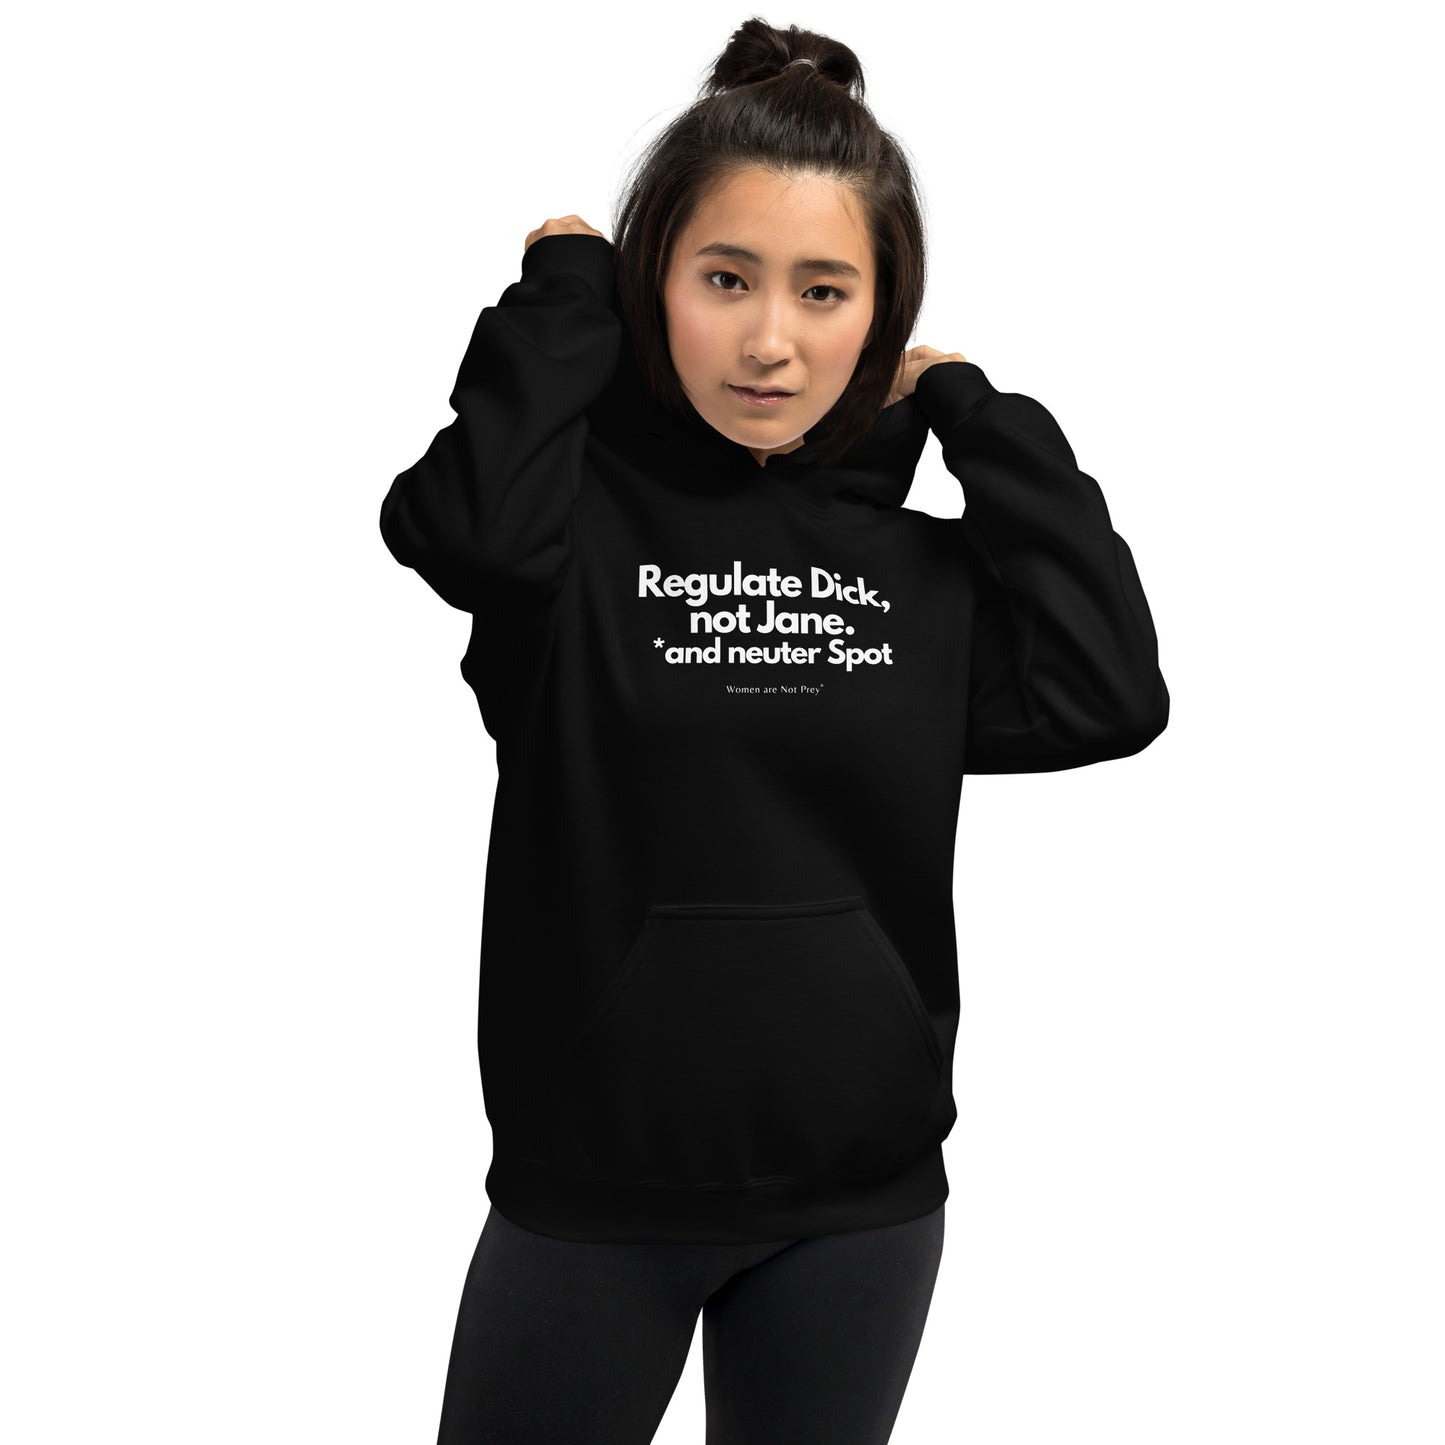 Regulate Dick, not Jane, and neuter Spot- Unisex Hoodie from Women are Not Prey®